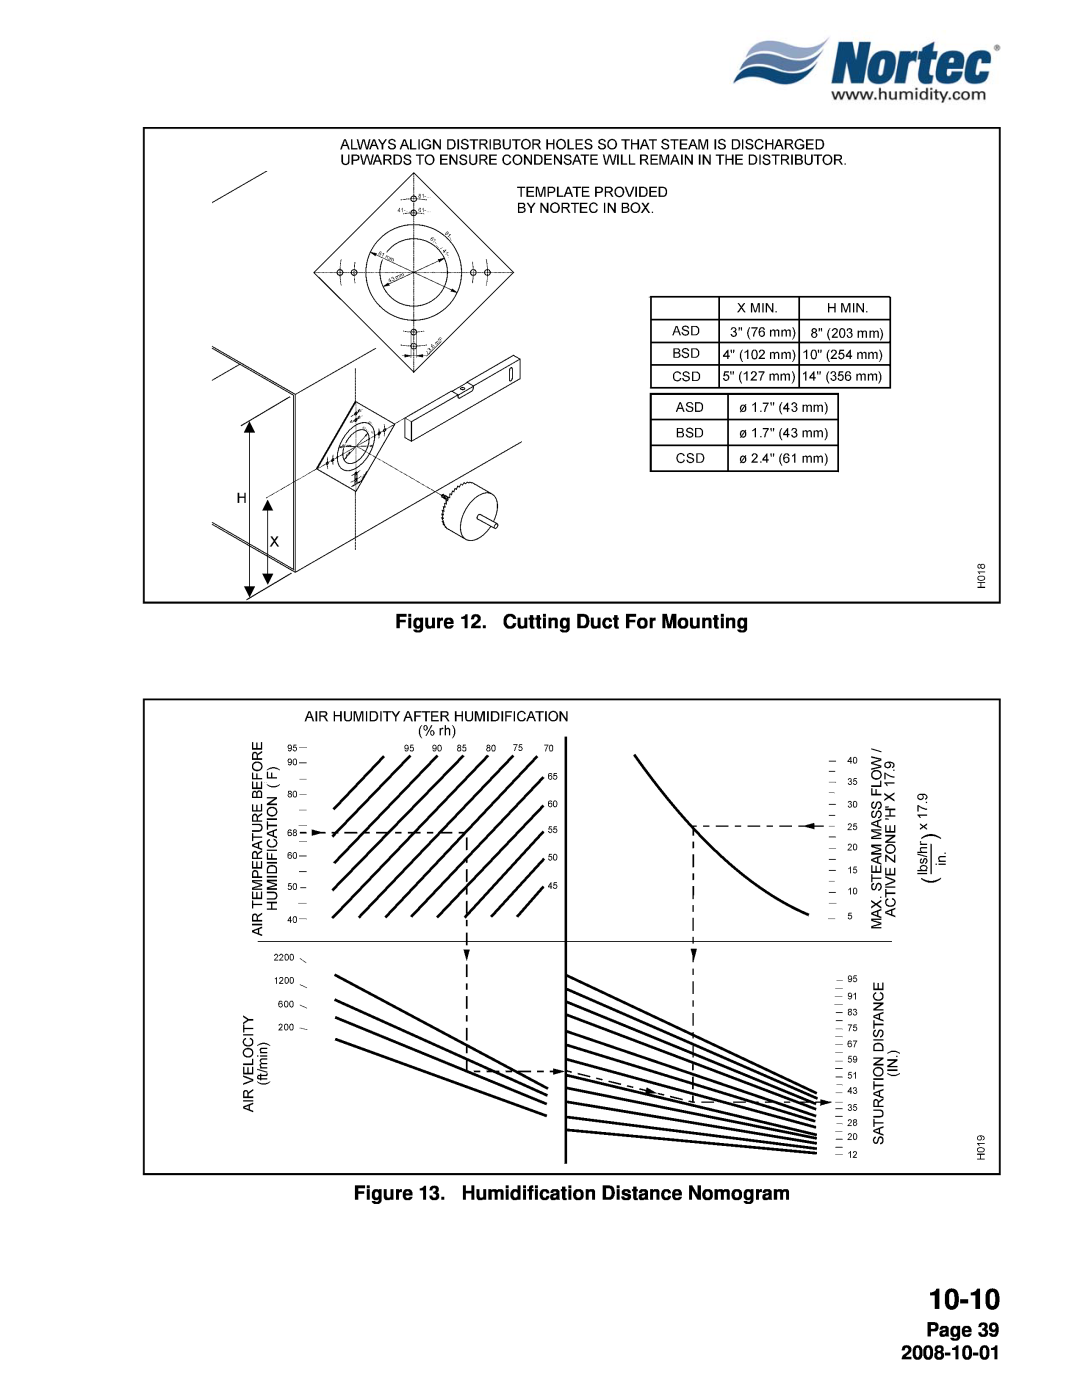 Nortec NHTC, NHPC manual 10-10, Cutting Duct For Mounting, Humidification Distance Nomogram, Page 39 